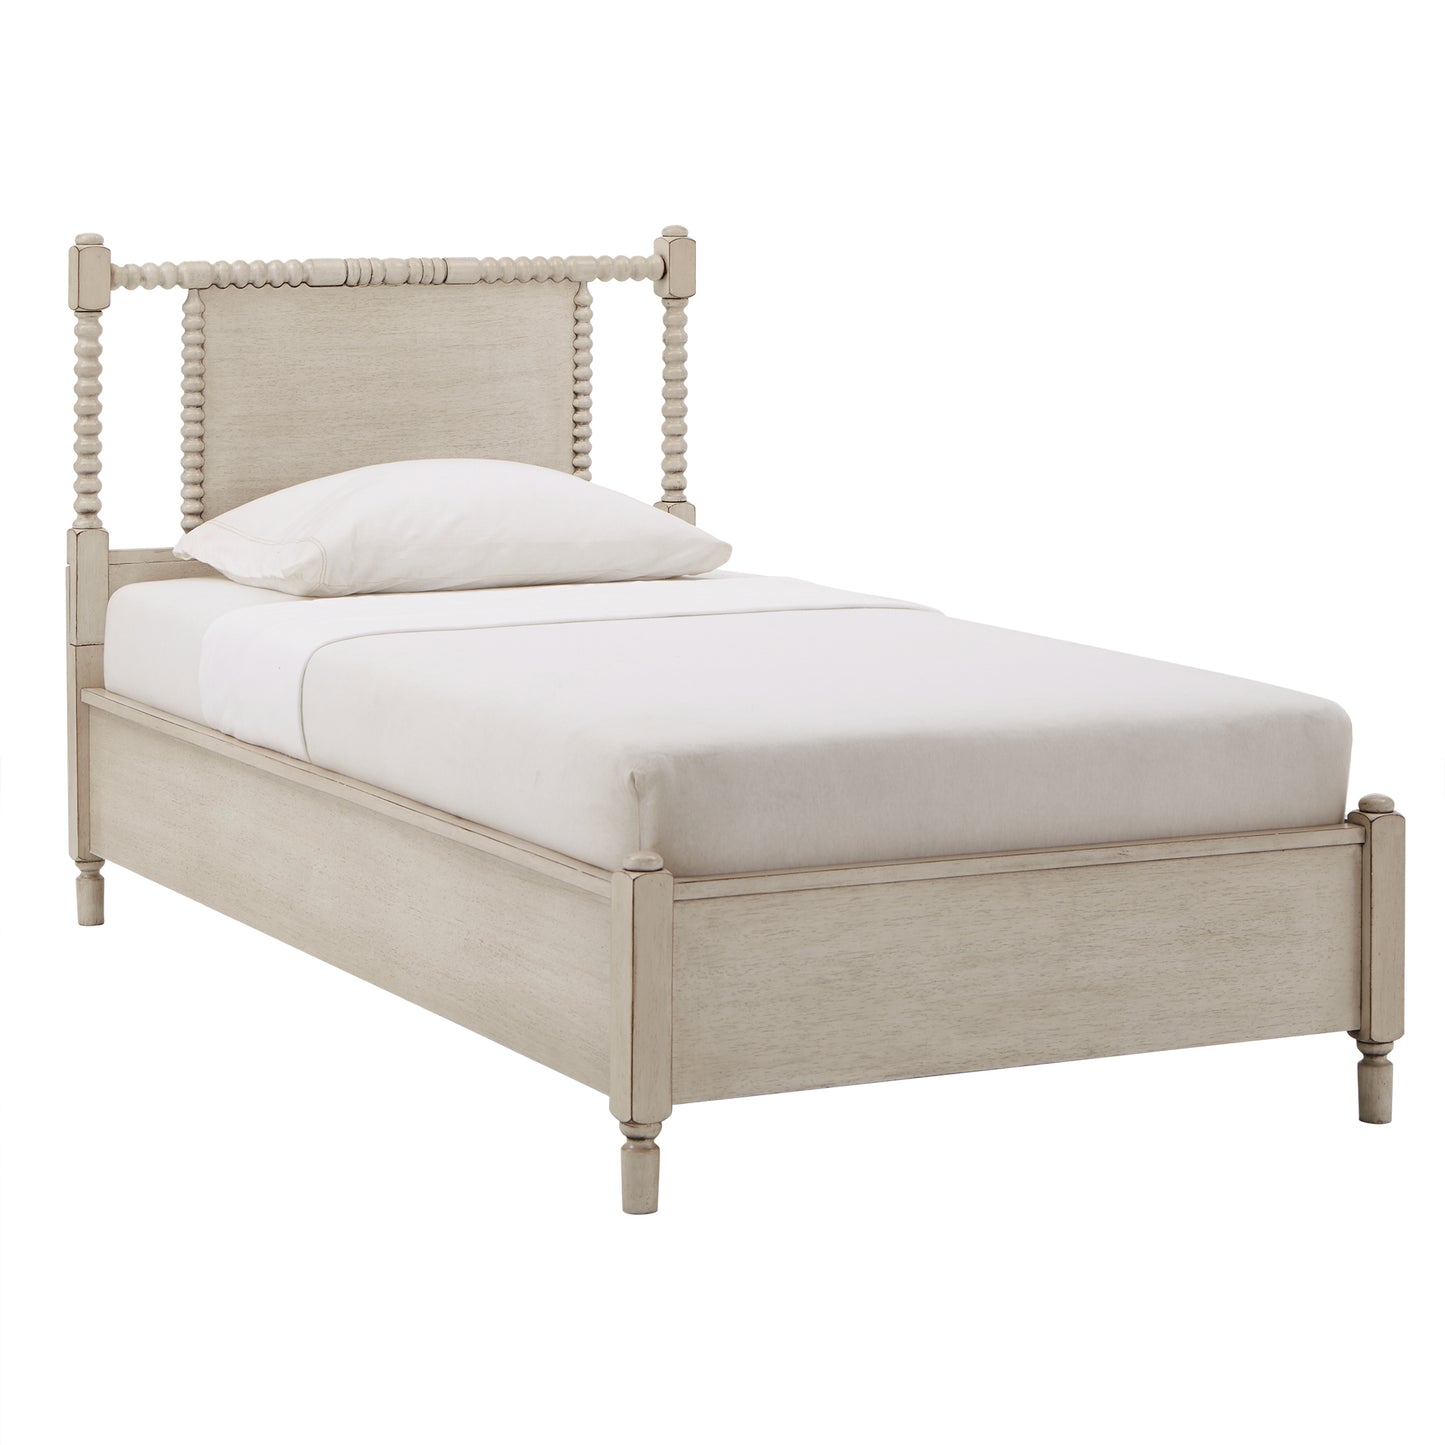 Antique Finish Beaded Wood Platform Bed - Antique White, Twin Size